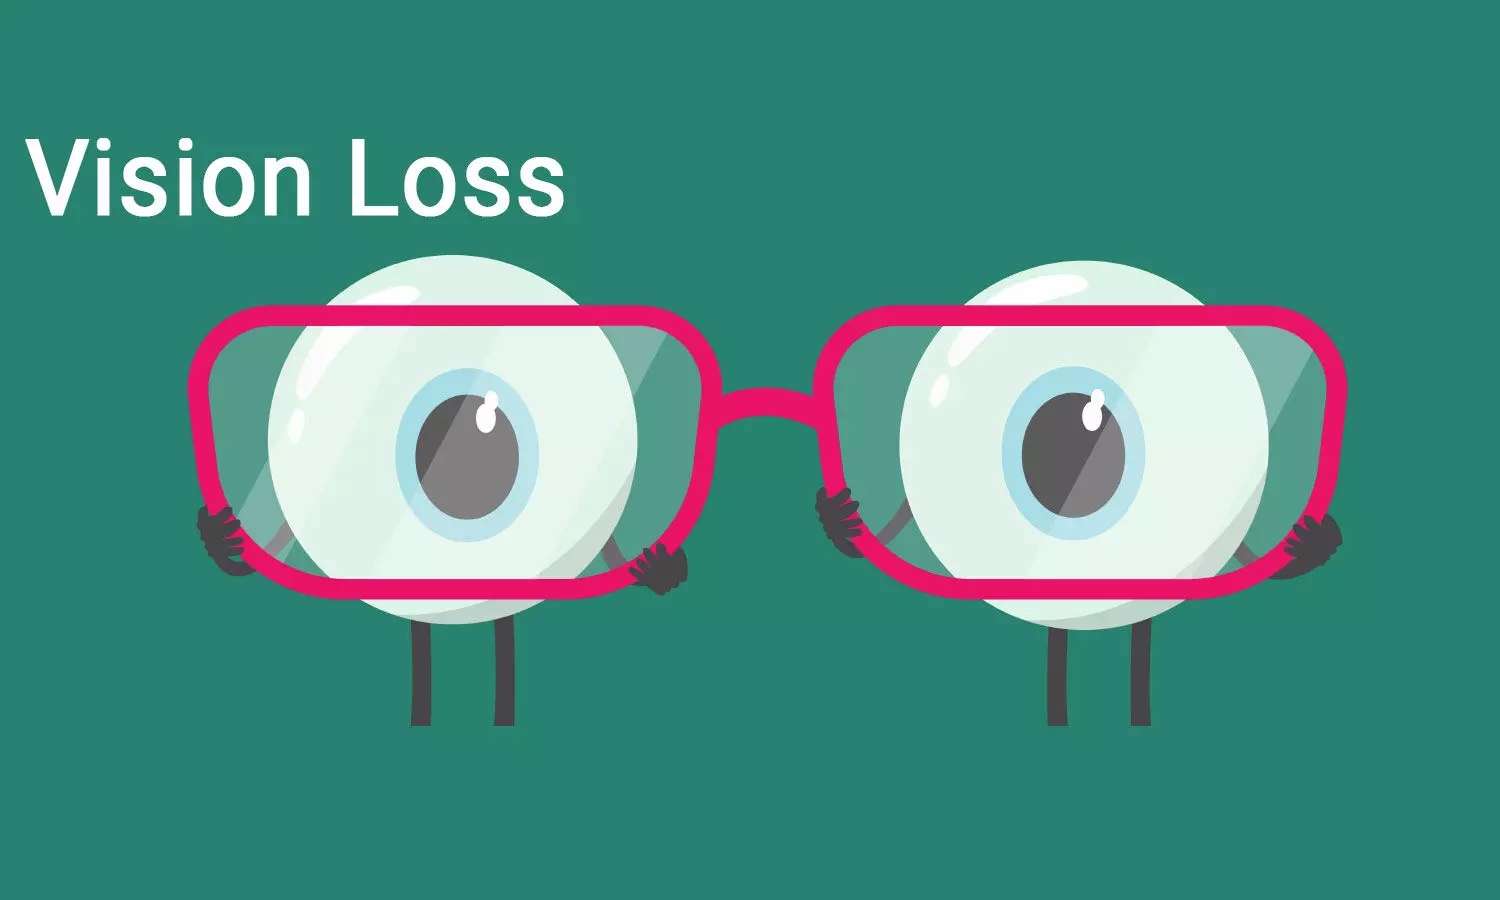 Treatment not always needed to prevent vision loss in patients with elevated eye pressure